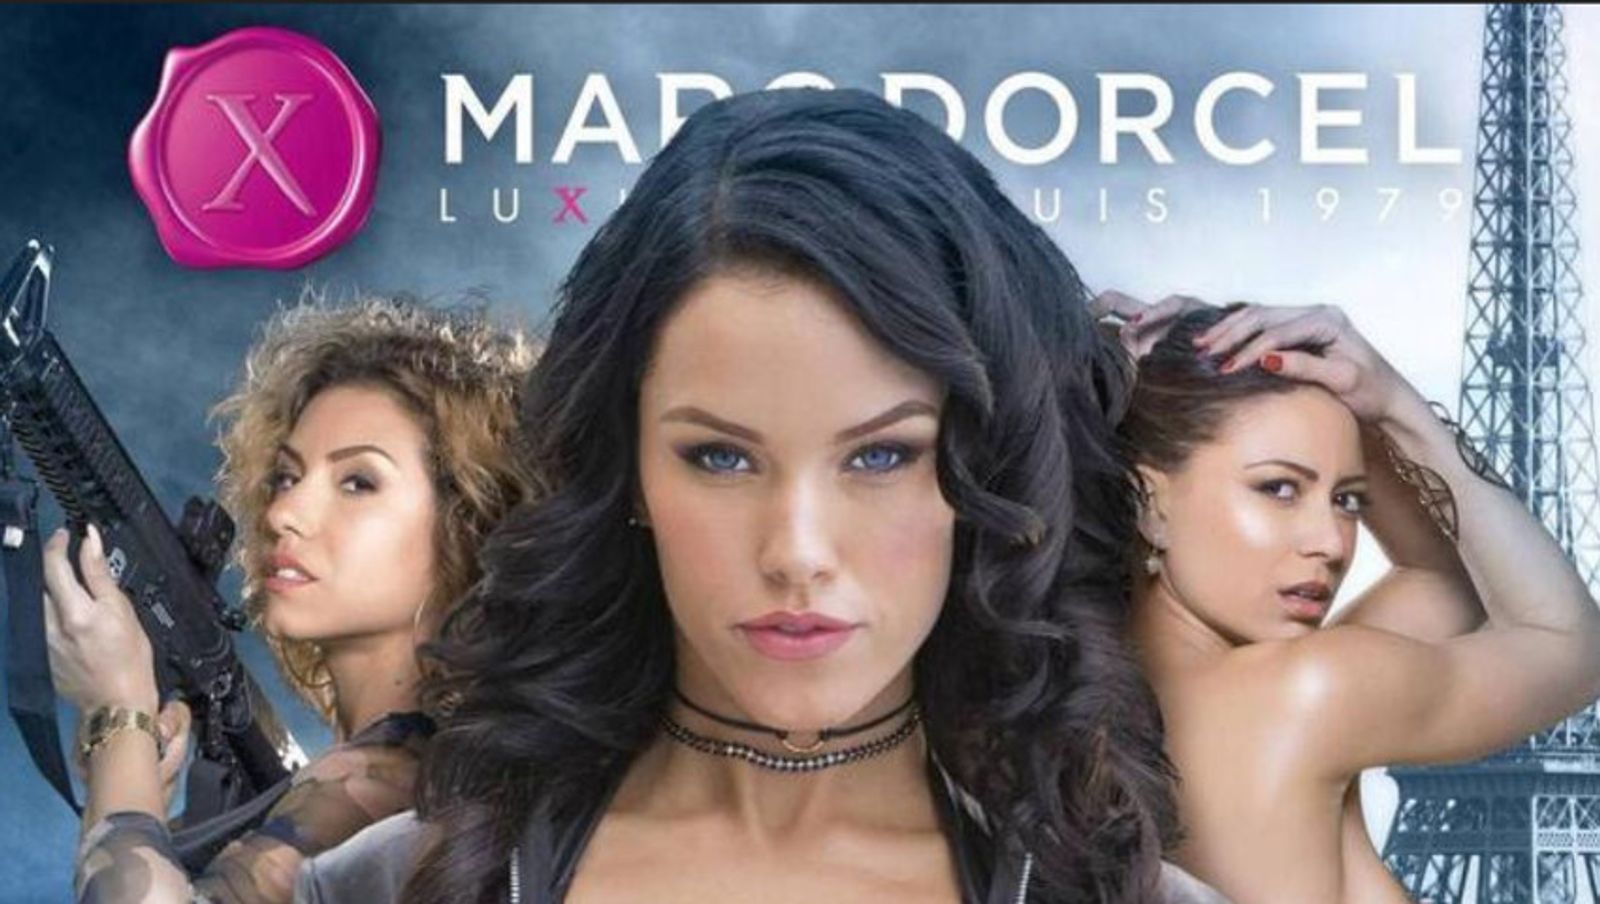 Wicked Pictures, Marc Dorcel to Host 'Undercover' Release Party